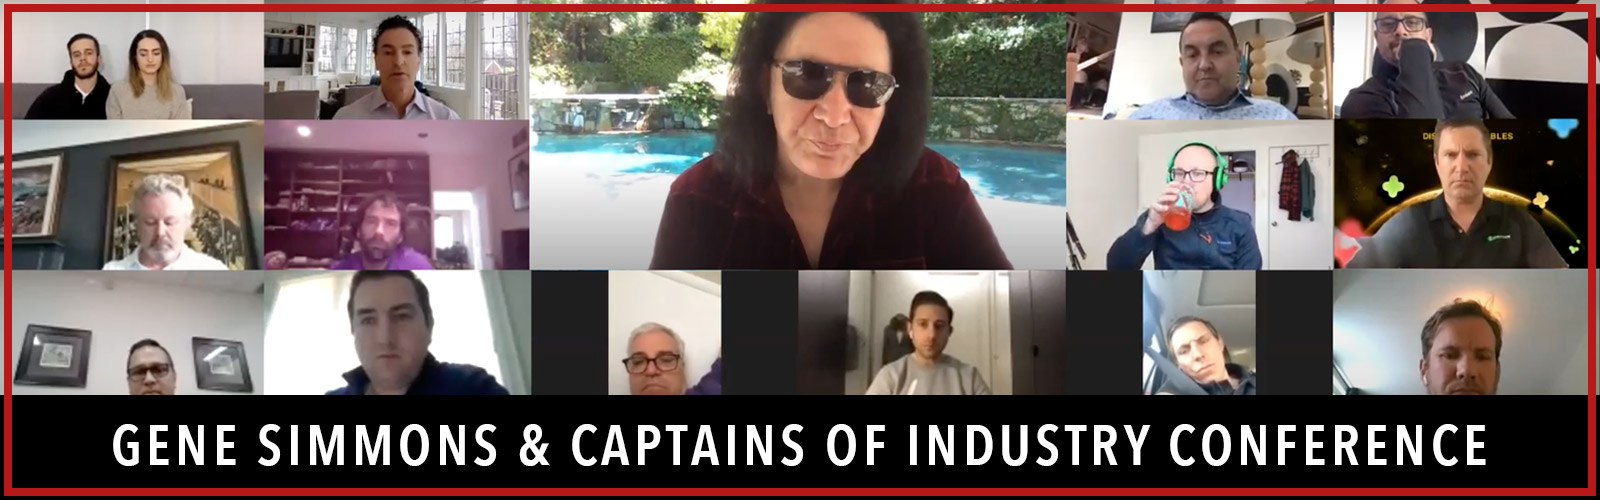 Gene Simmons & Captains Of Industry Conference